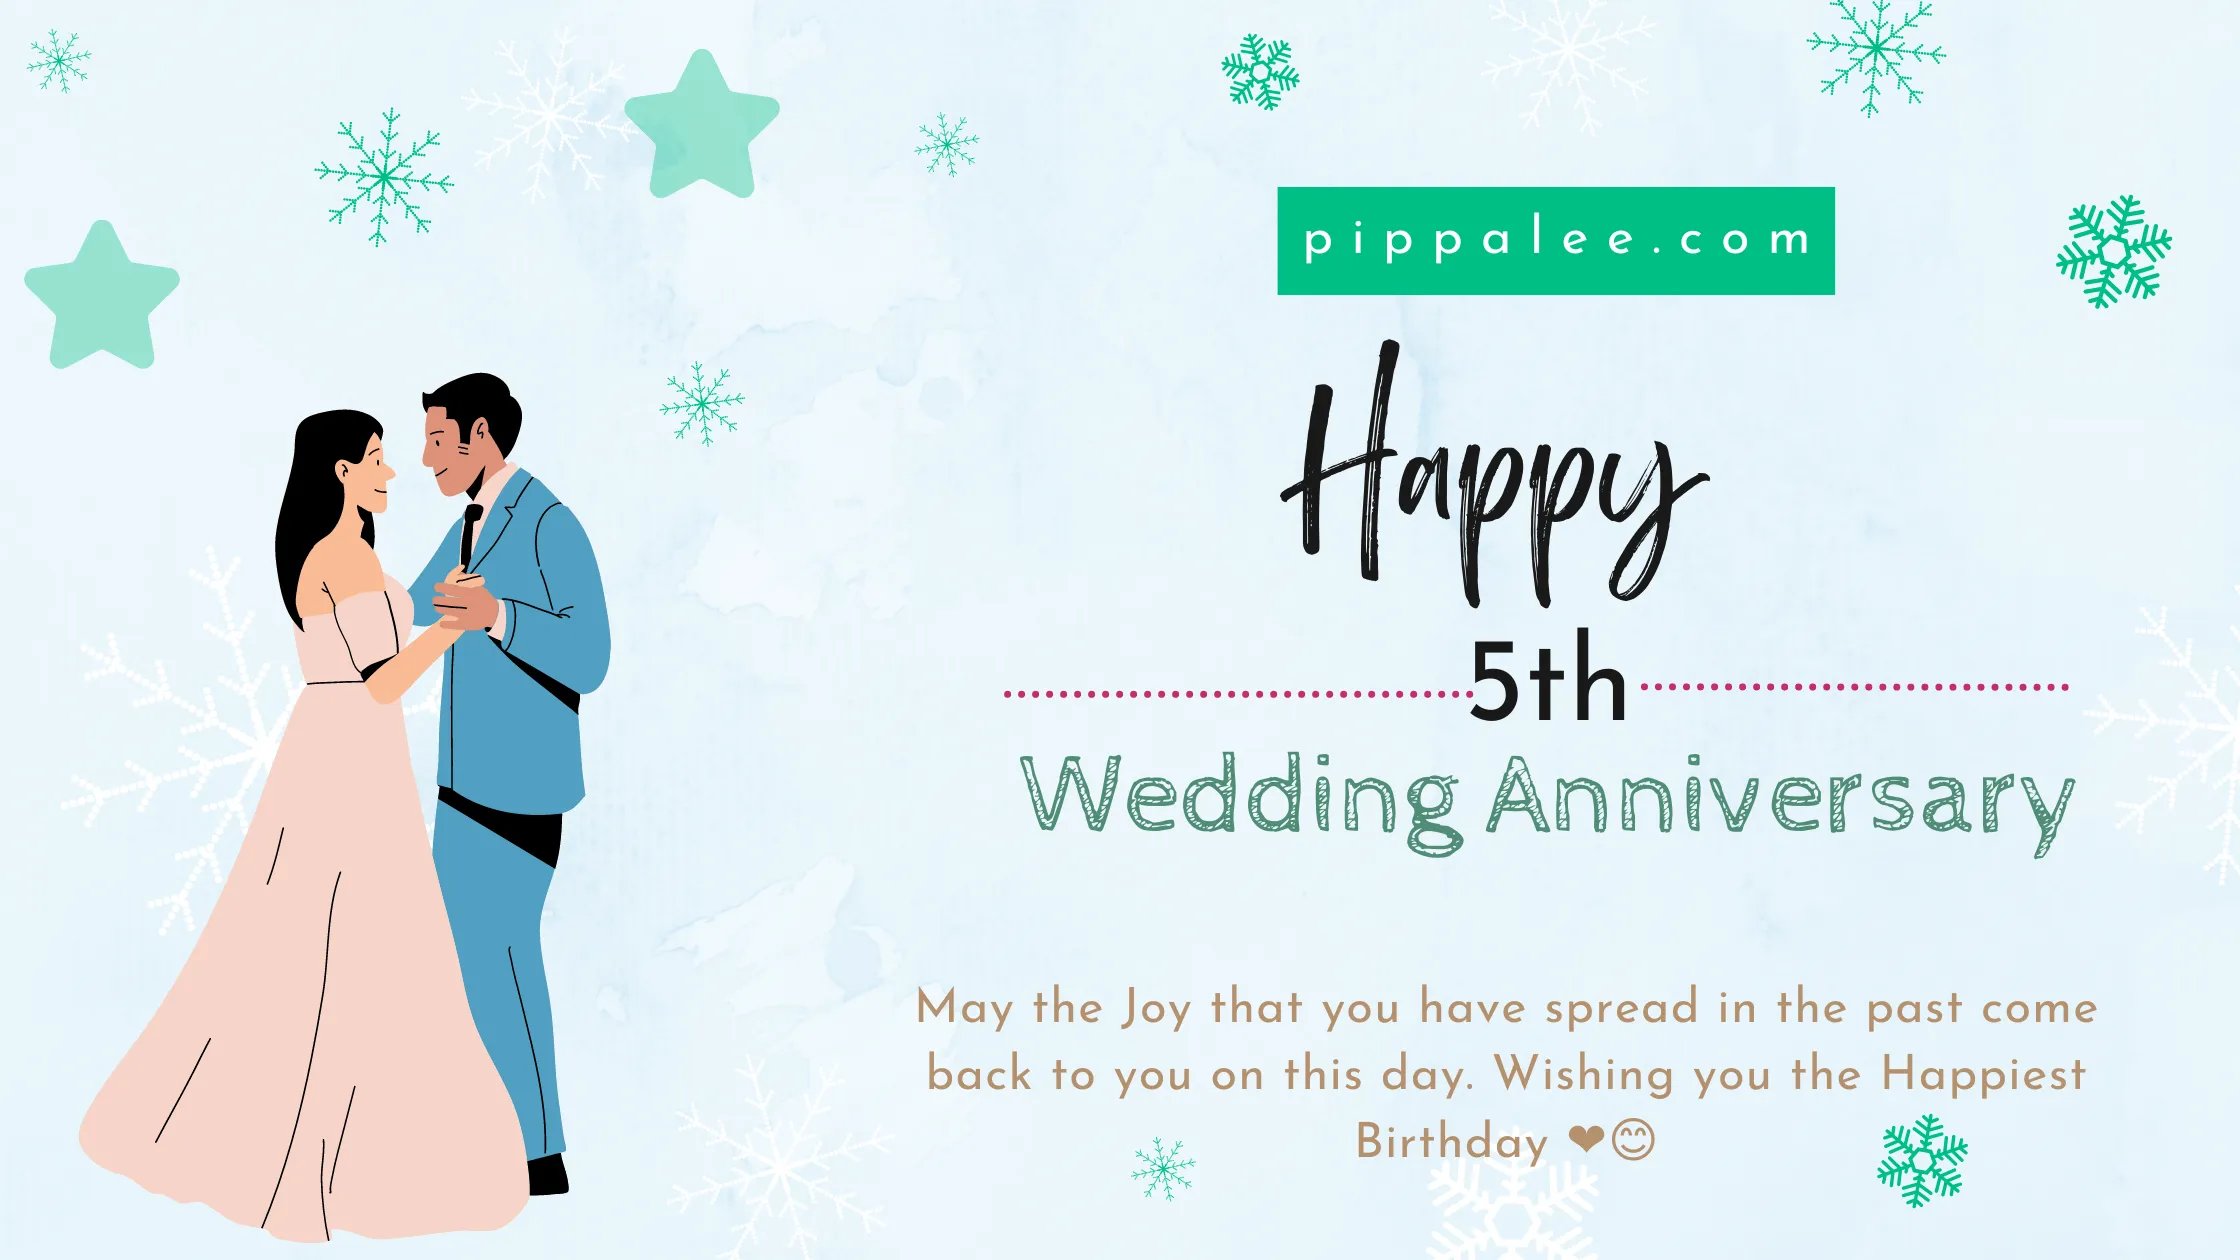 5th Wedding Anniversary - Wishes & Messages